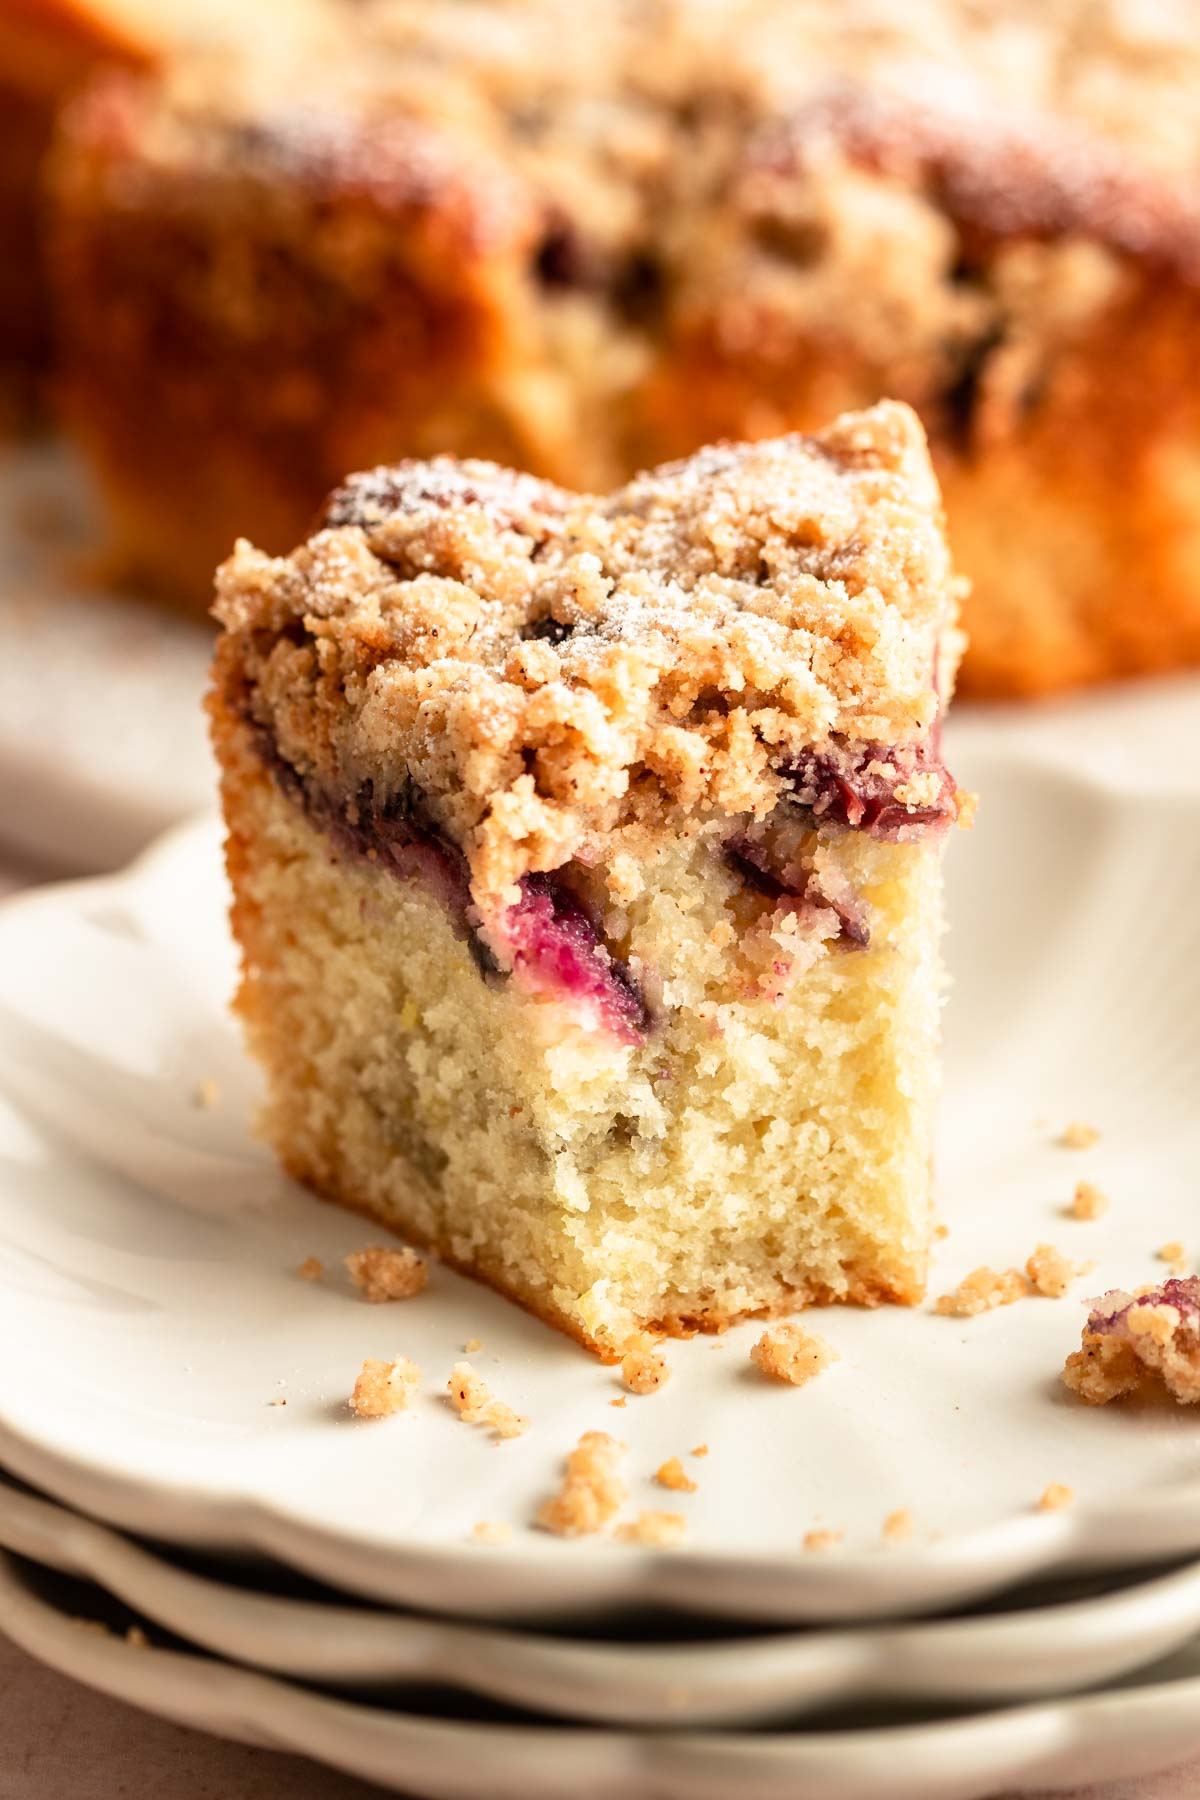 Slice of cherry coffee cake with a bite missing.